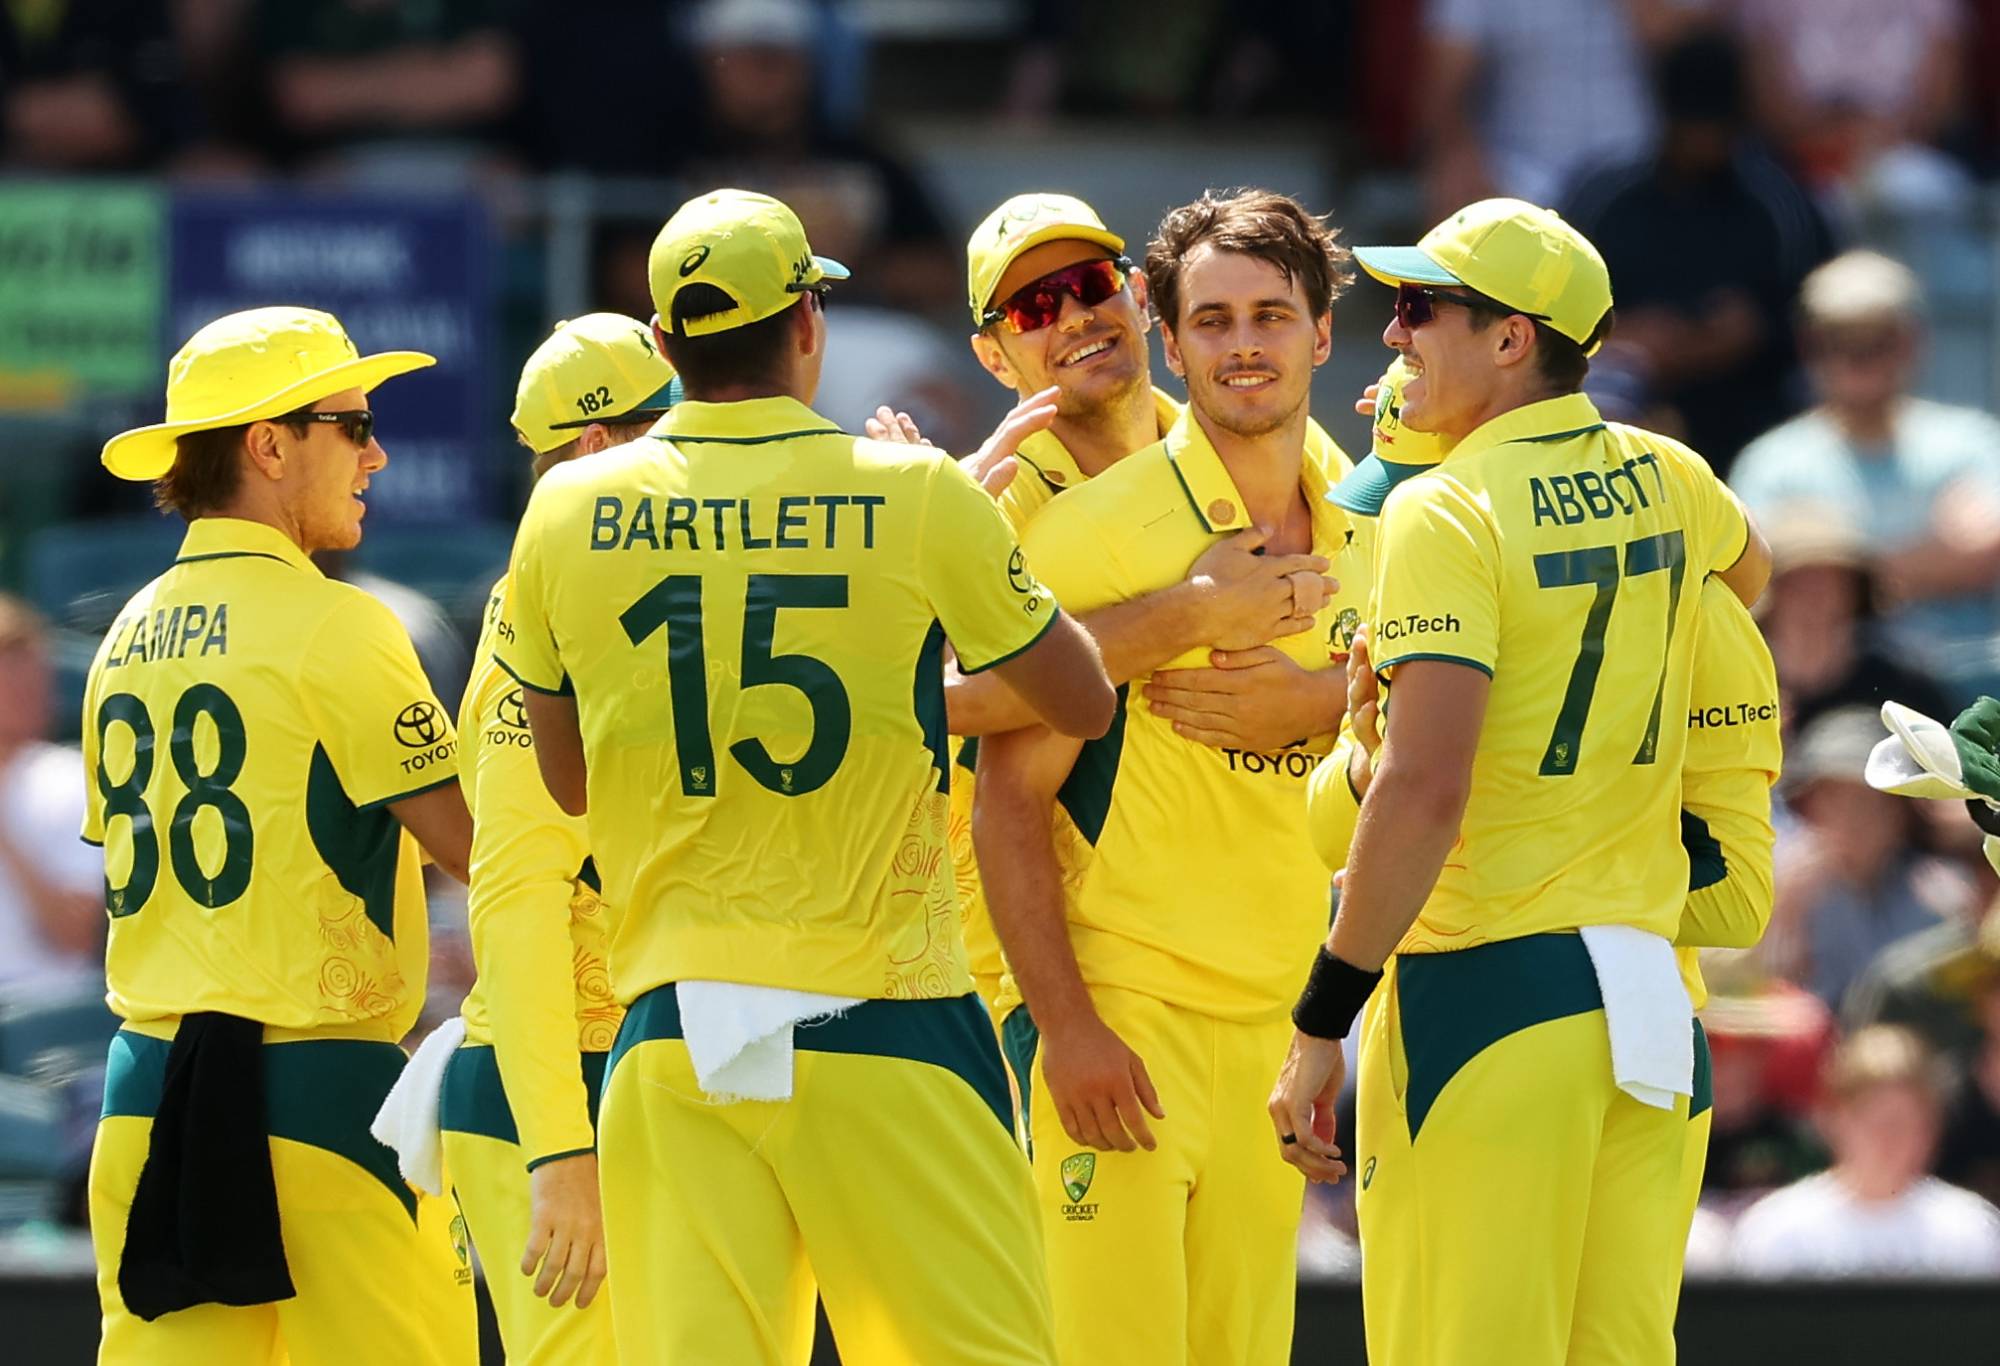 CANBERRA, AUSTRALIA - FEBRUARY 06: Lance Morris of Australia celebrates with team mates after taking the wicket of Keacy Carty of the West Indies during game three of the Men's One Day International match between Australia and West Indies at Manuka Oval on February 06, 2024 in Canberra, Australia. (Photo by Matt King/Getty Images)